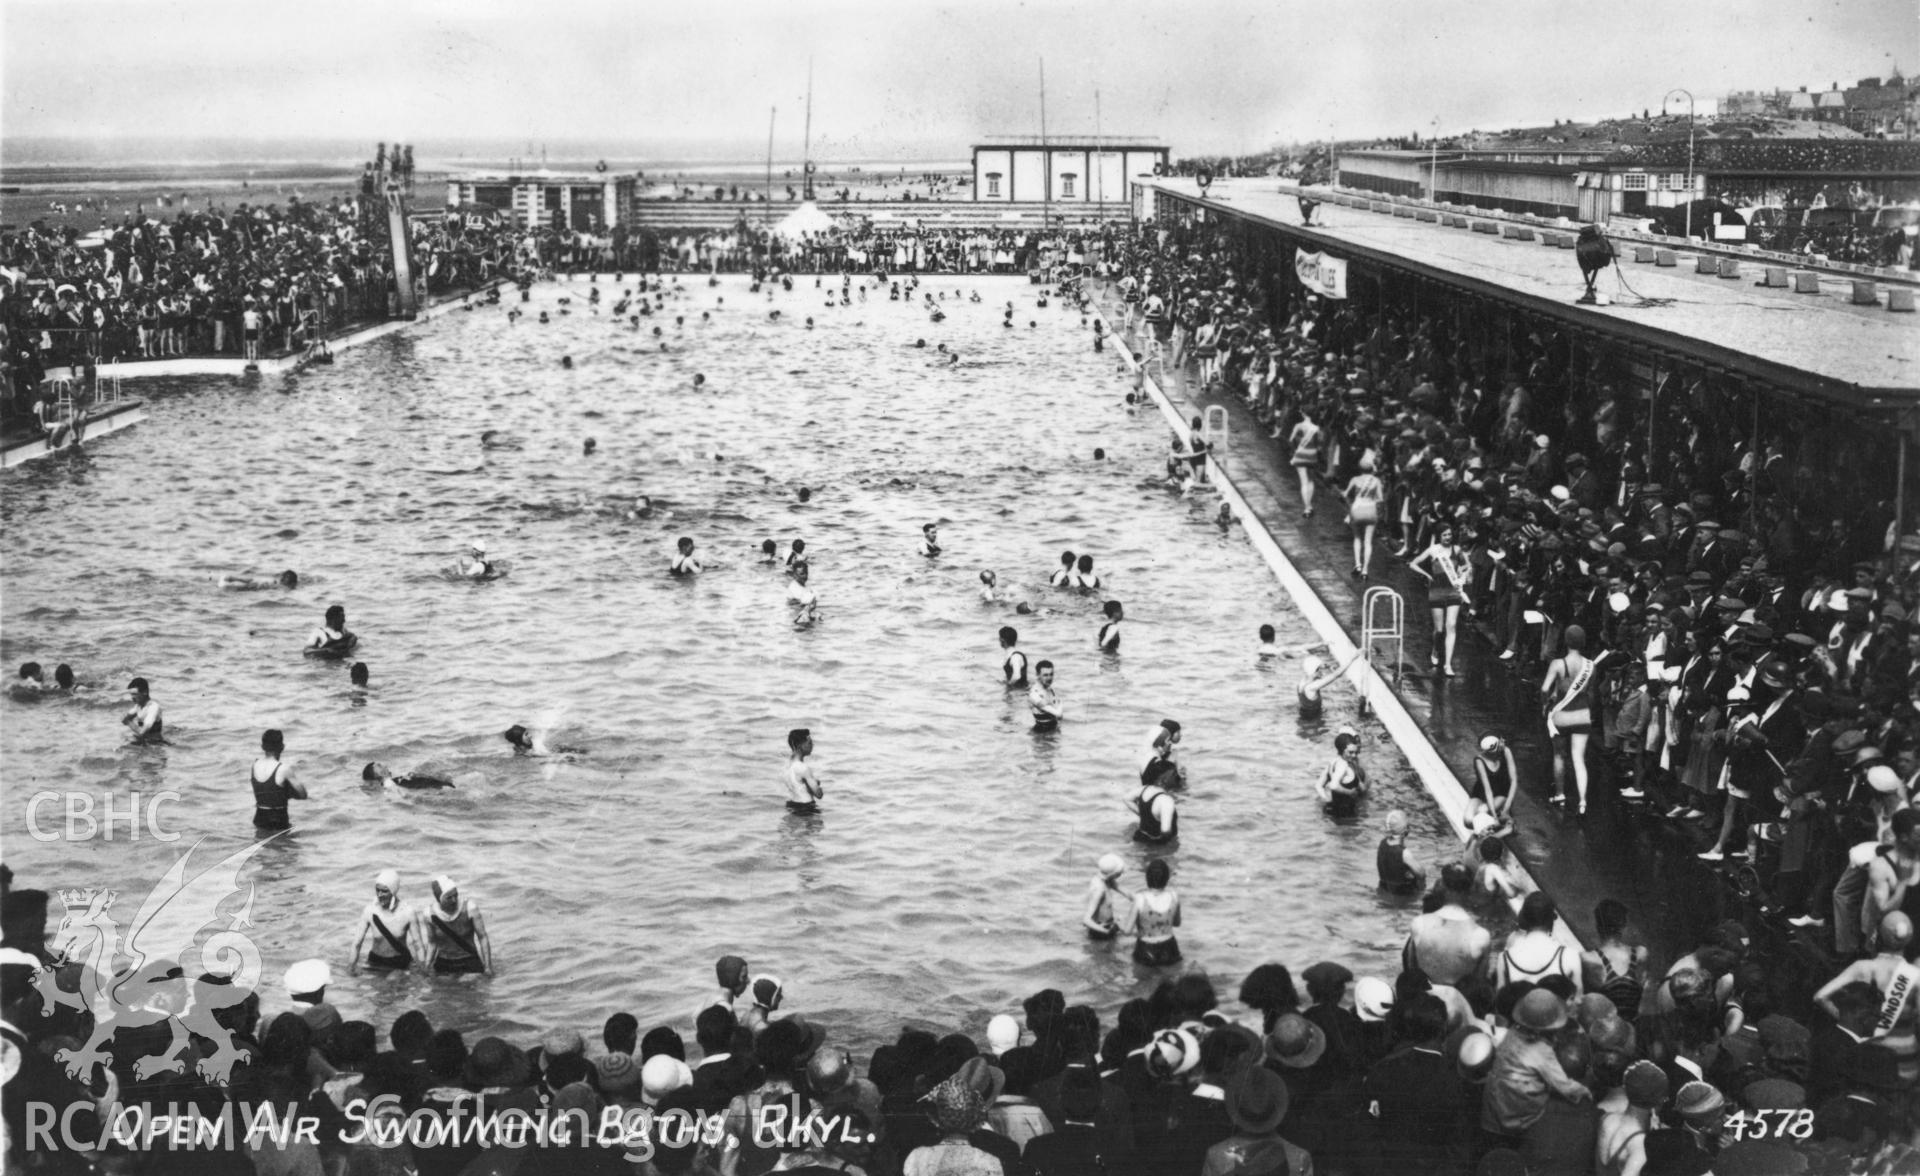 Digitised copy of a 1949  black and white postcard showing the Open Air Swimming Pool, Rhyl, produced by RA Postcards Ltd and loaned for copying by Daryl Leeworthy.